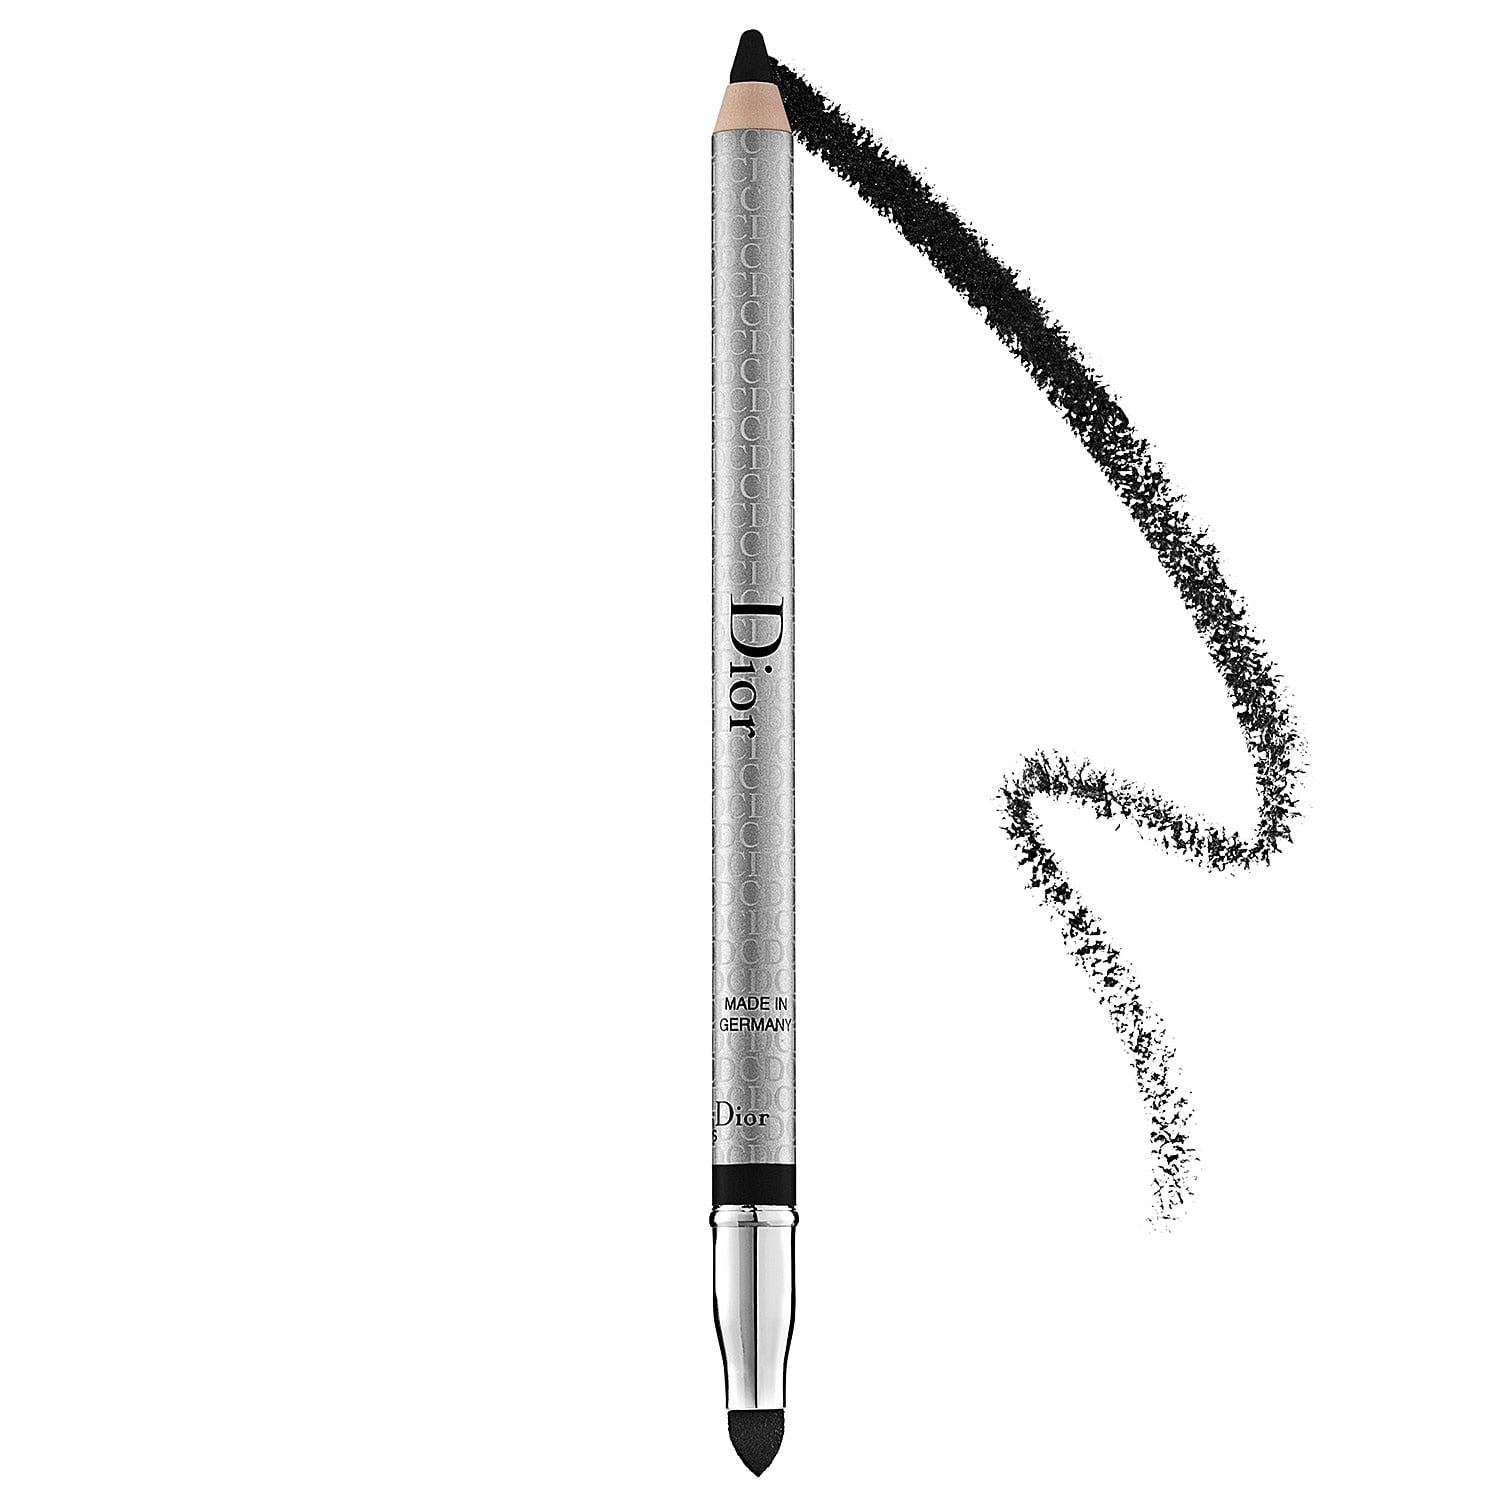 Dior Crayon Eyeliner Waterproof | Waterproof That Last All Day Long, No Matter What You're Doing (or Not) | POPSUGAR Beauty Photo 10